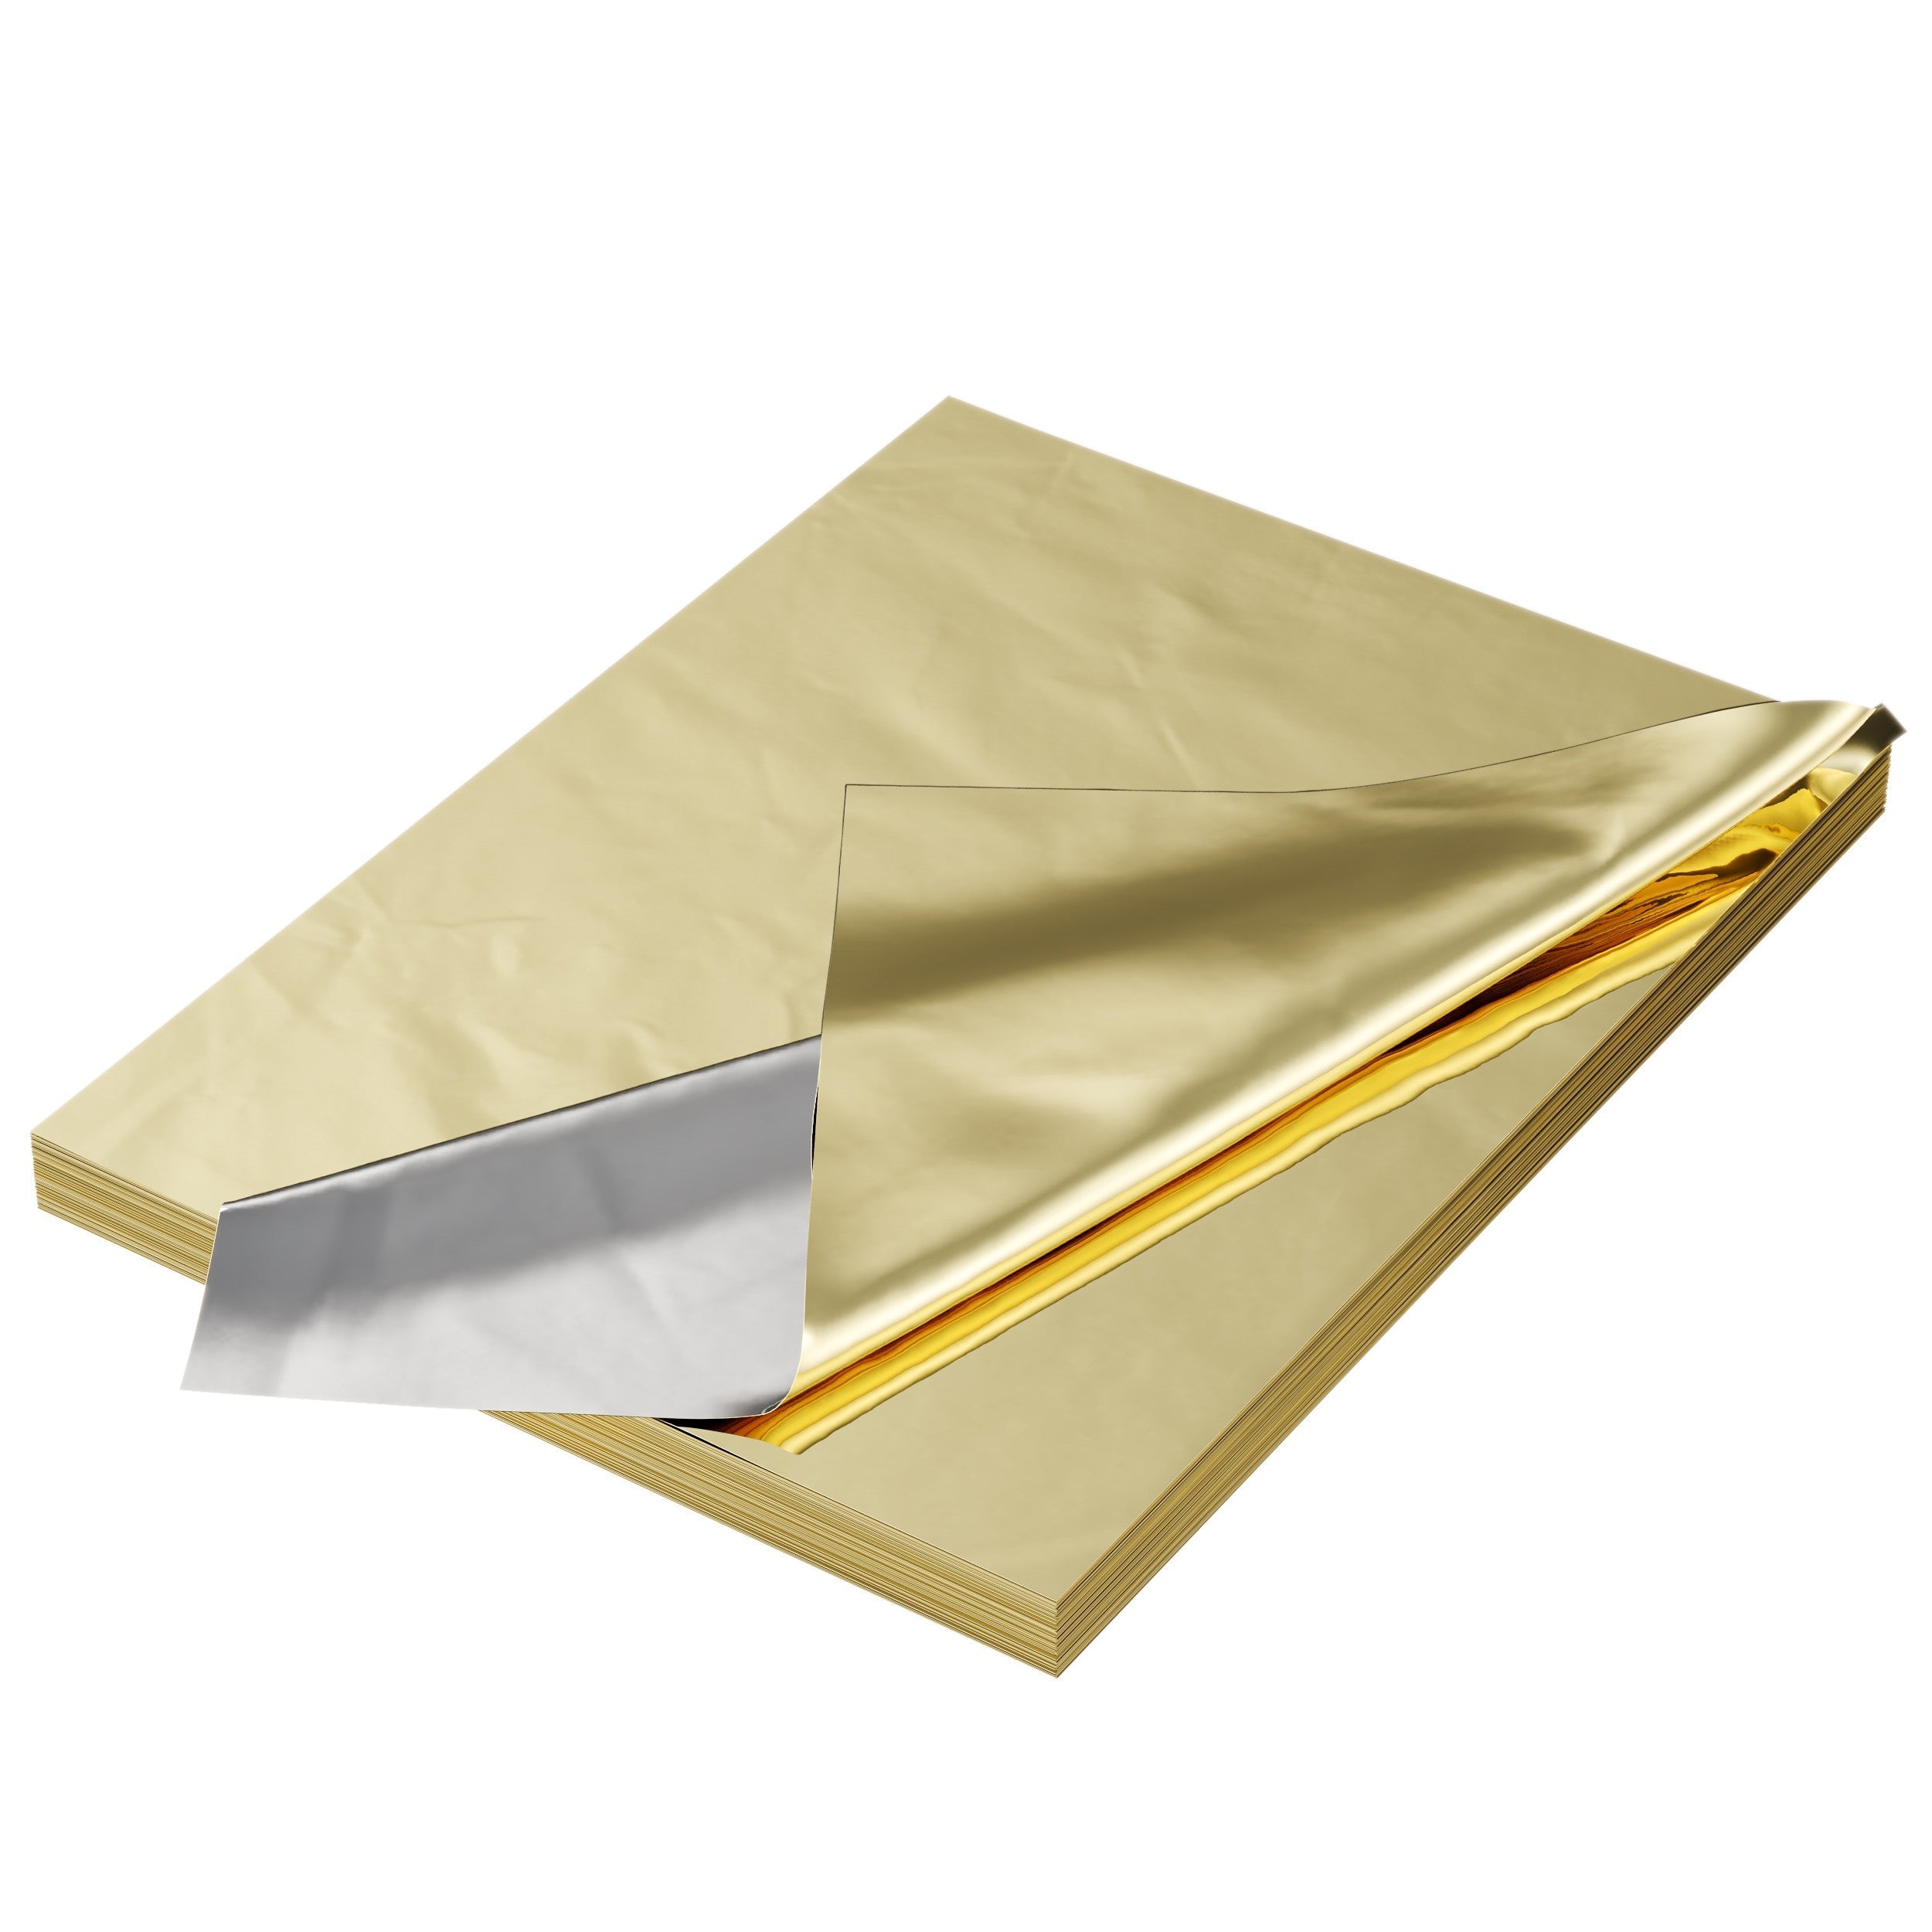 Metallic Gold Wrapping Sheets For Gift Wrapping - 100 CT